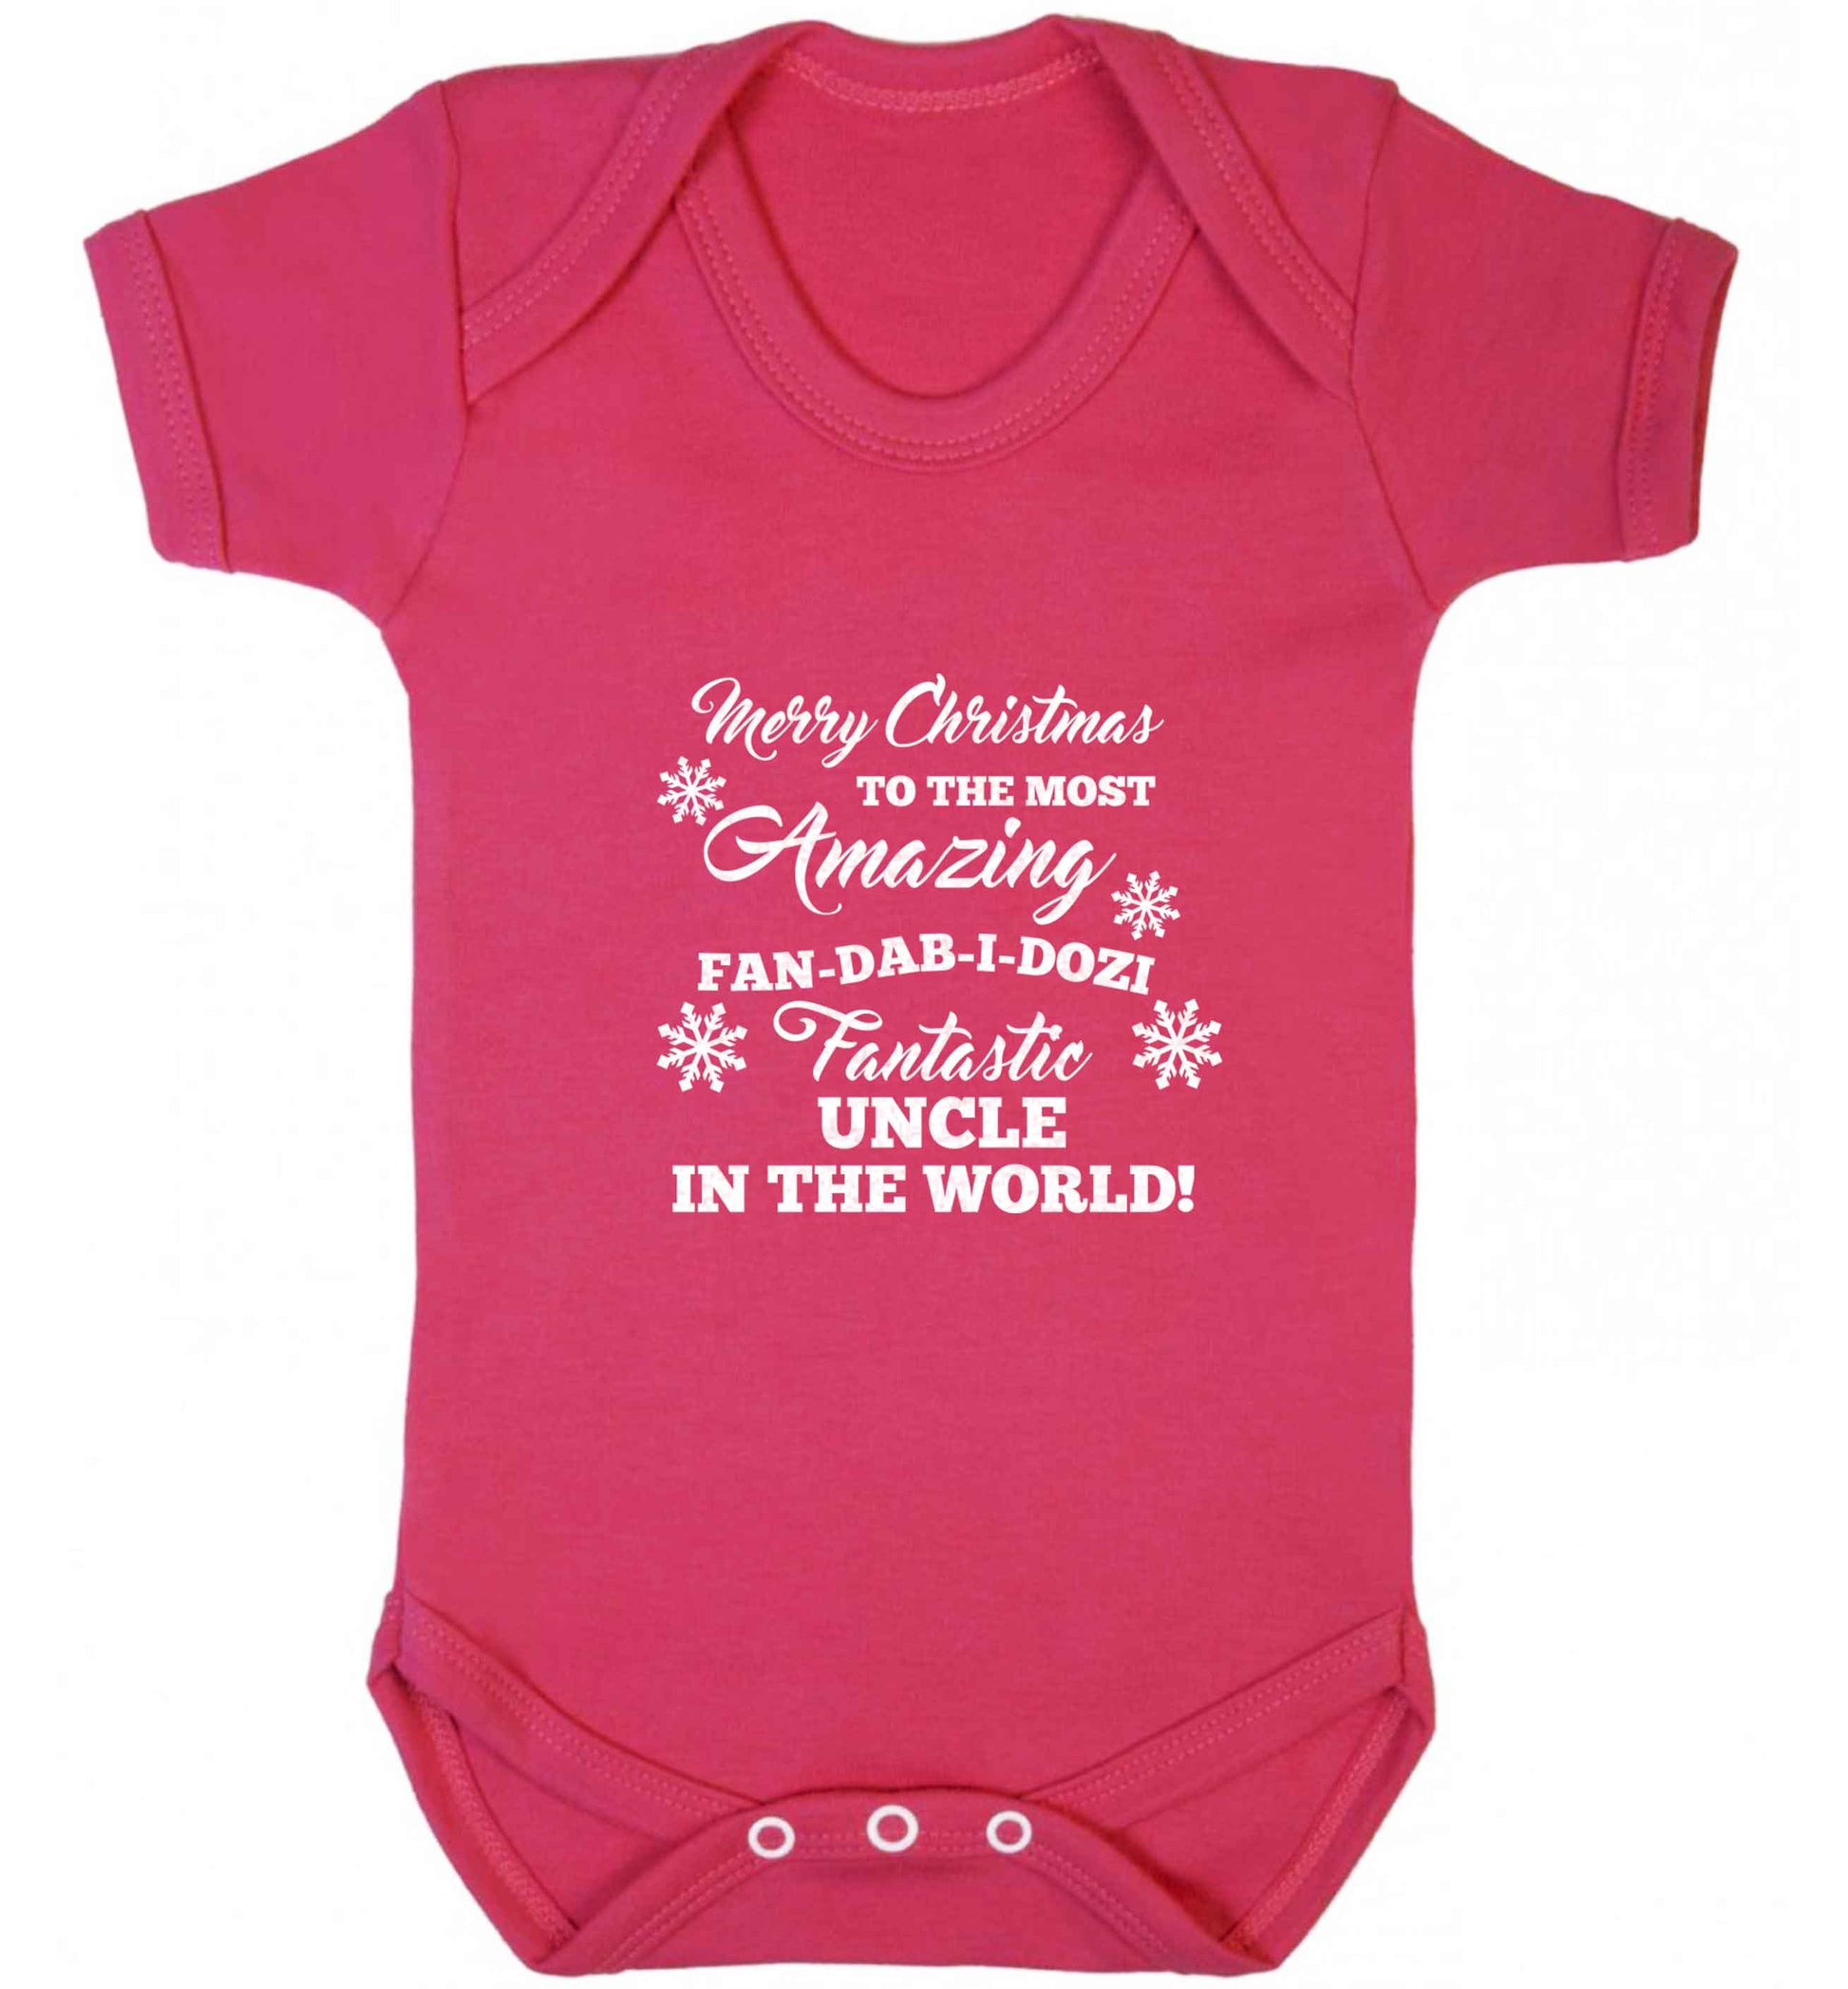 Merry Christmas to the most amazing fan-dab-i-dozi fantasic Uncle in the world baby vest dark pink 18-24 months